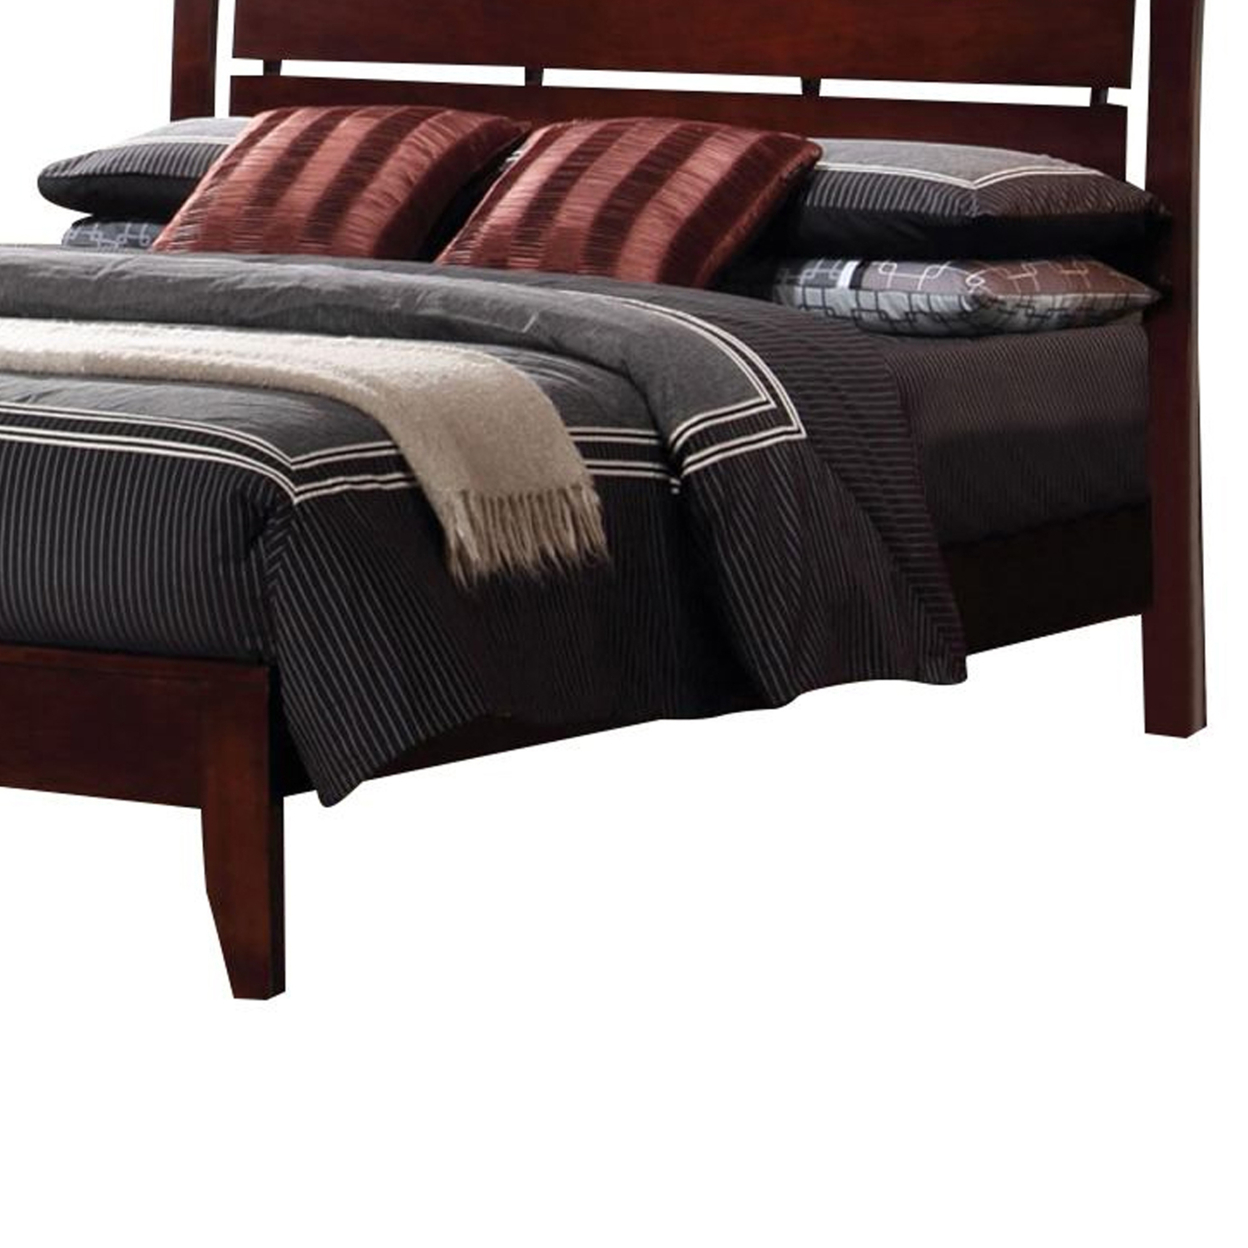 Transitional Wooden Full Size Bed With Slatted Style Headboard, Brown- Saltoro Sherpi